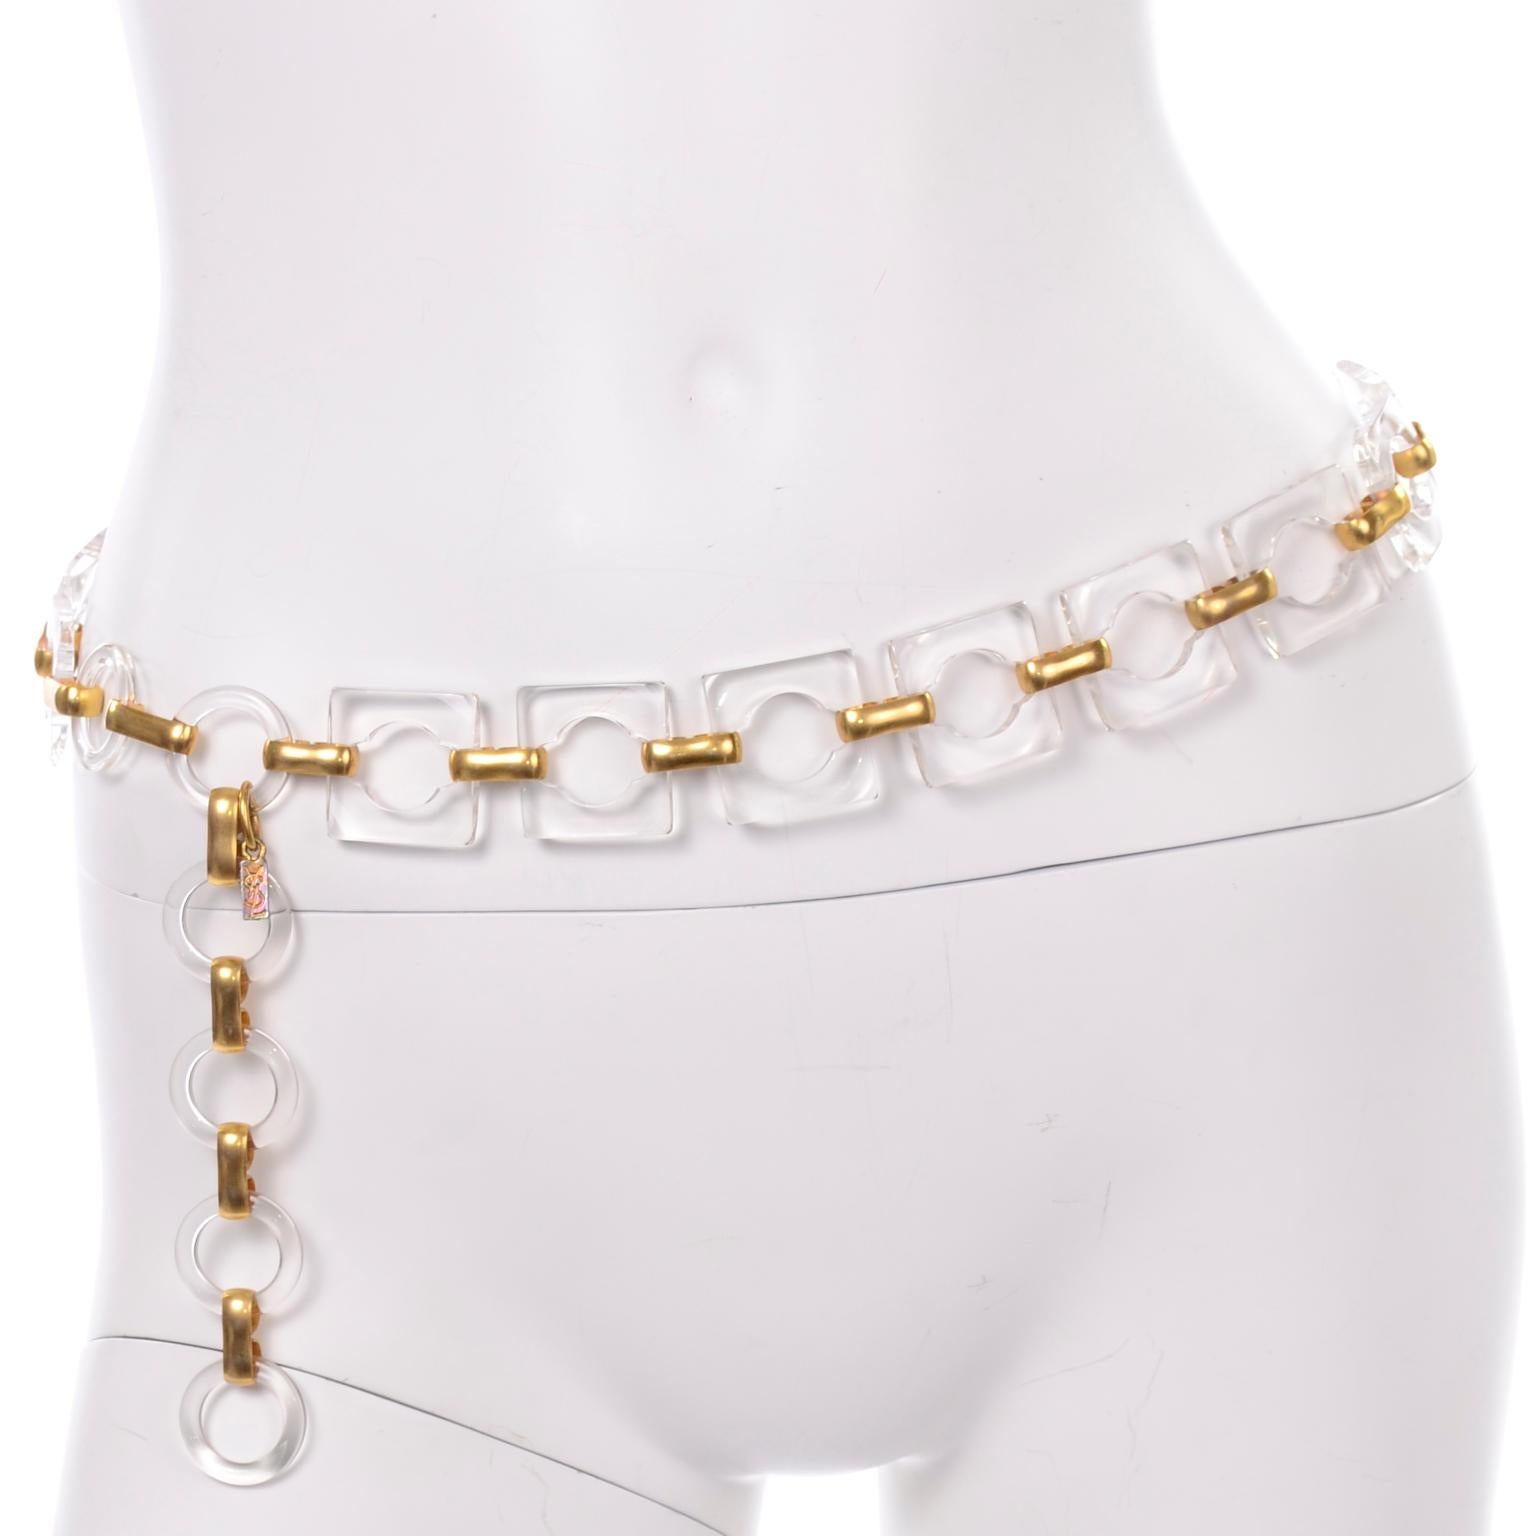 We love this vintage 1970's YSL square lucite link belt w/ gold metal hardware! The beautiful lucite squares and circle donut shapes are connected by beautiful gold hardware hooks. This is completely adjustable with extra lucite loops that gives it